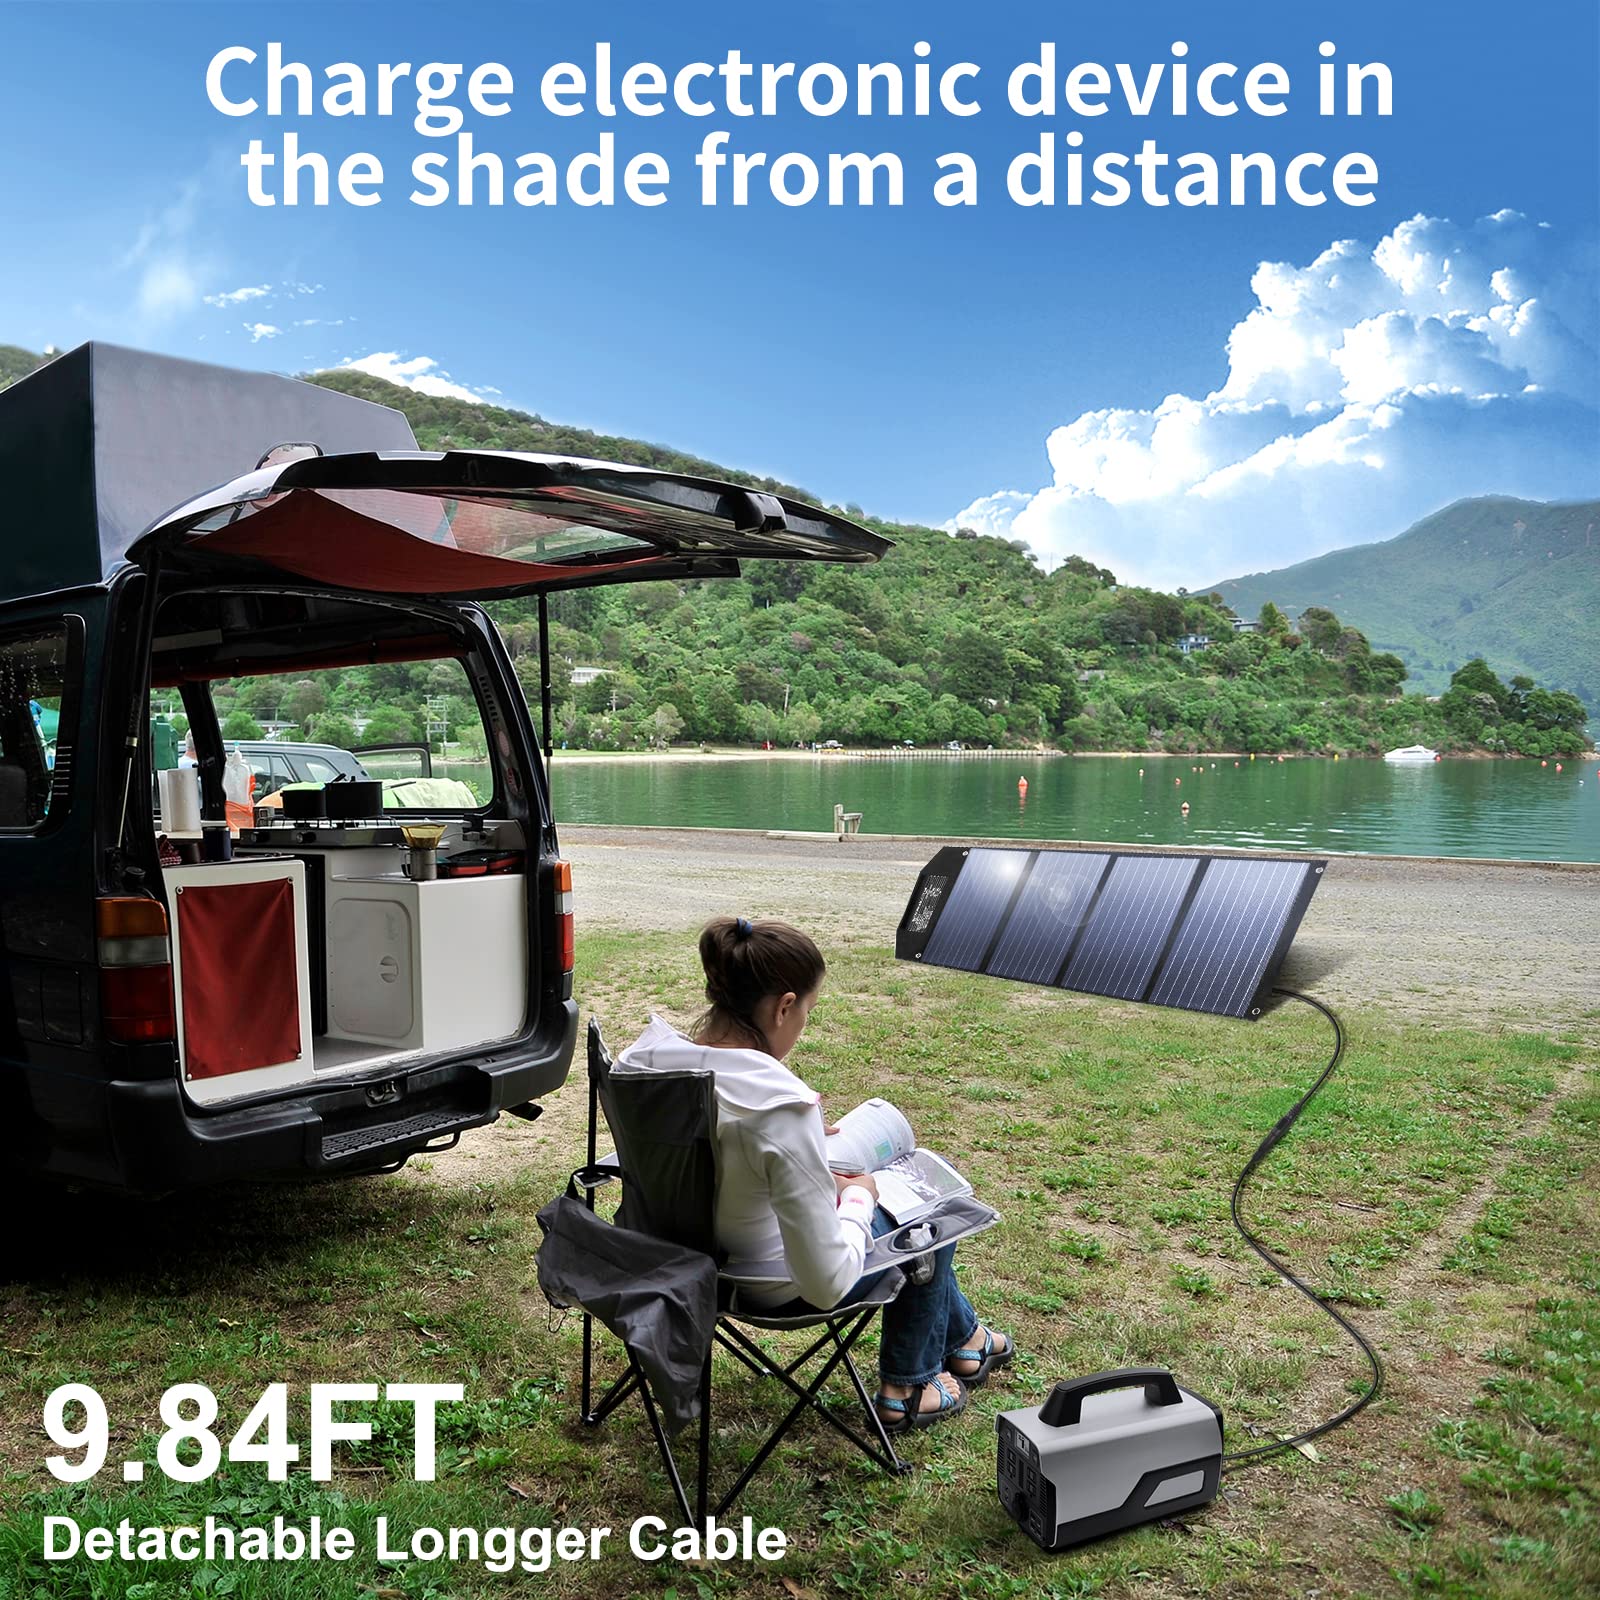 Solar Panel 120 Watt 20 Volt, Portable Solar Panel Kit ETFE Material Surface & Independent Intelligent USB Power Adapter (PD & QC 3.0), Foldable Solar Panel for Power Station RV Camping Off Grid